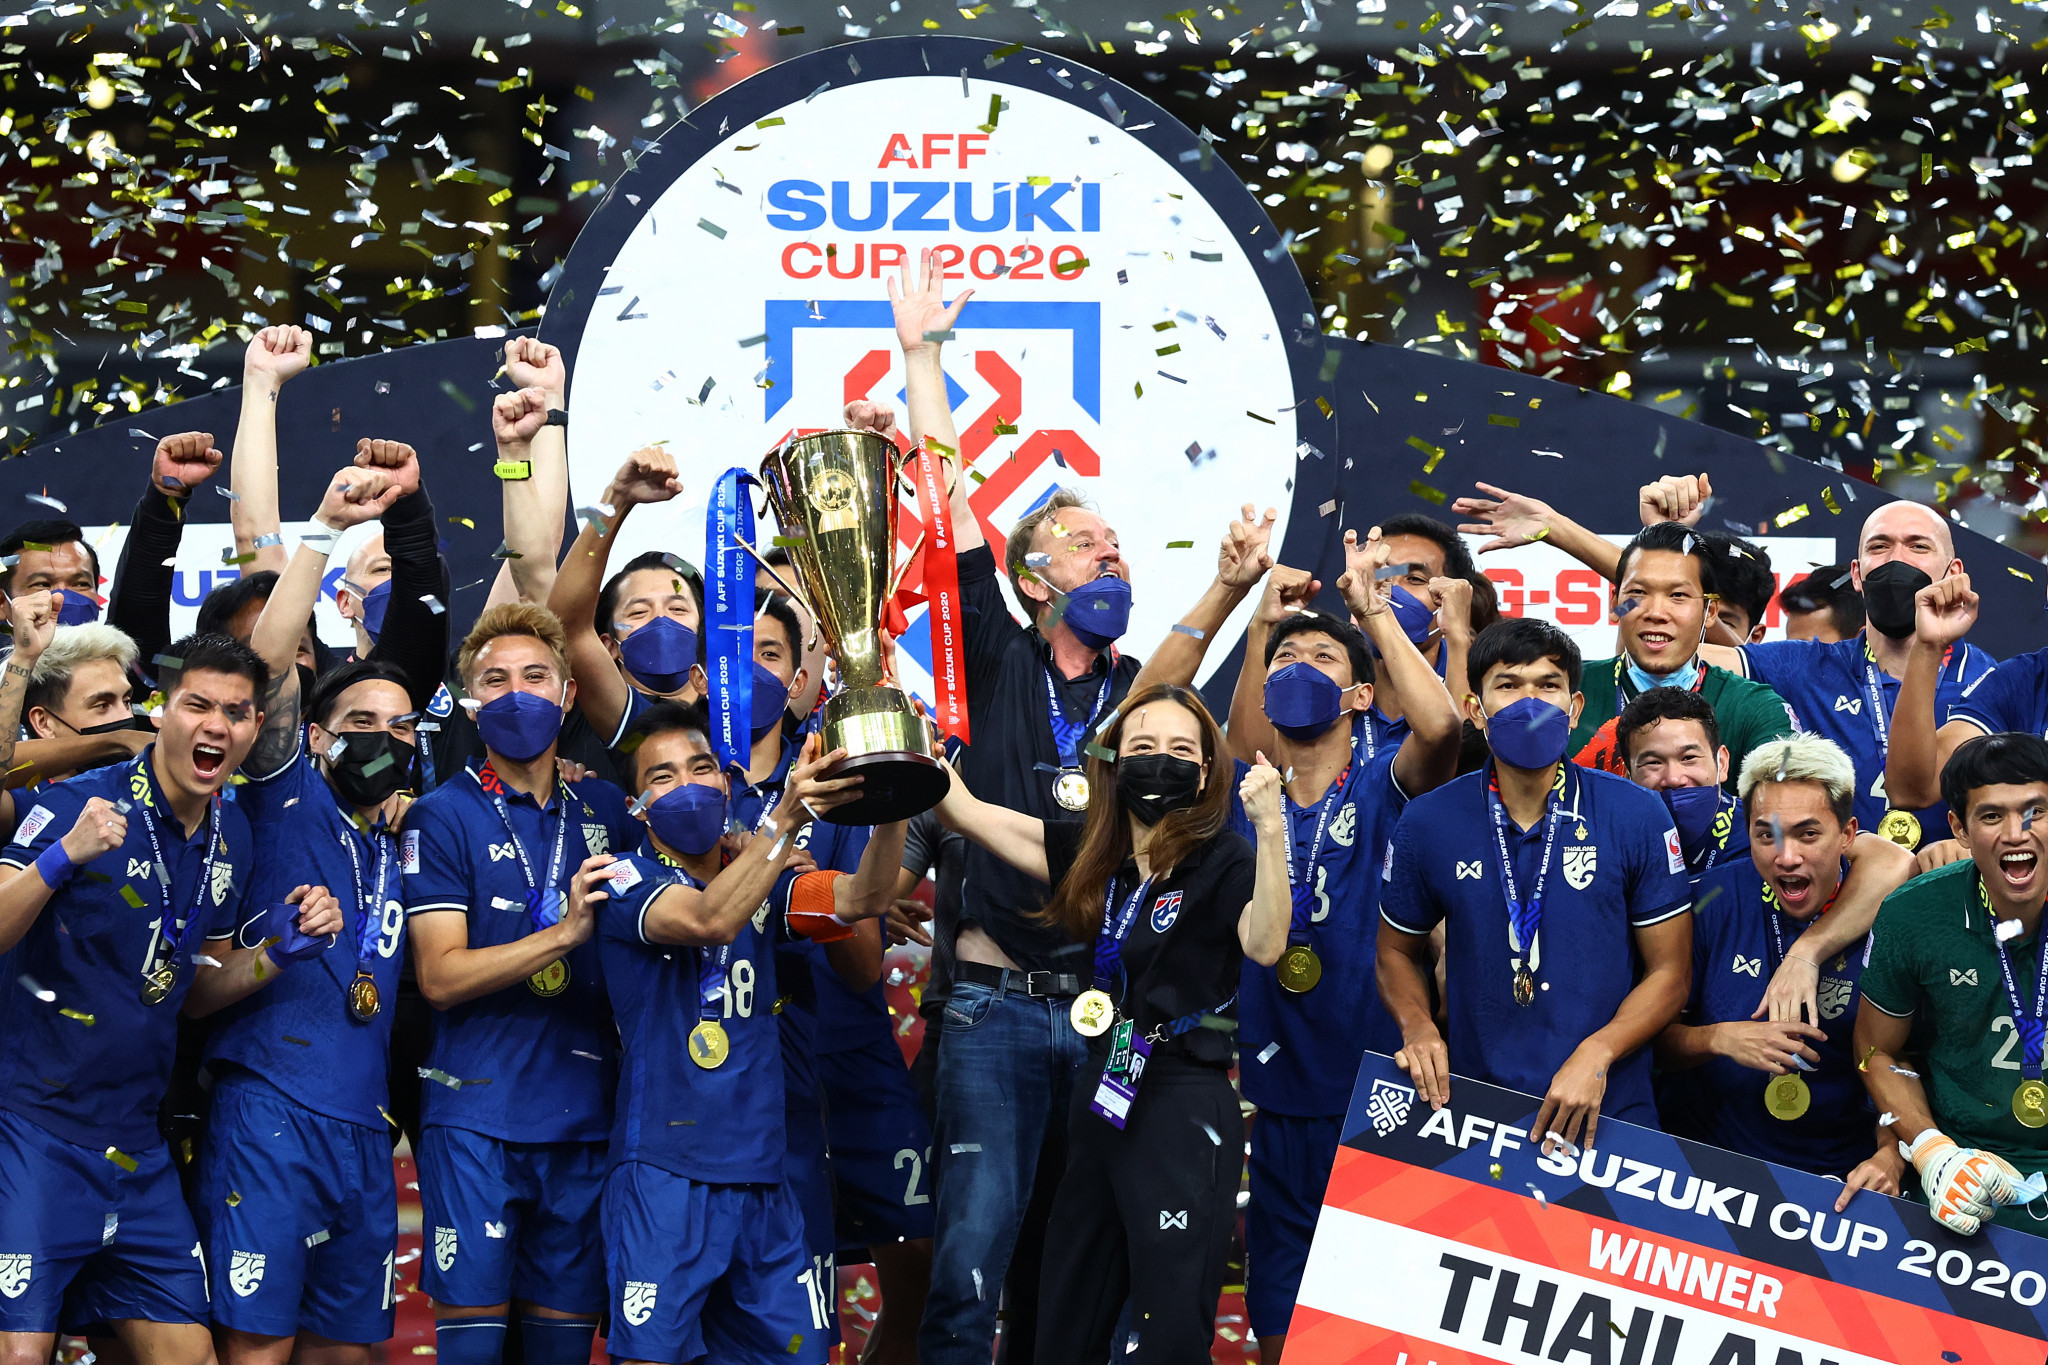 Thailand lift the AFF Suzuki Cup for a record sixth time after aggregate win